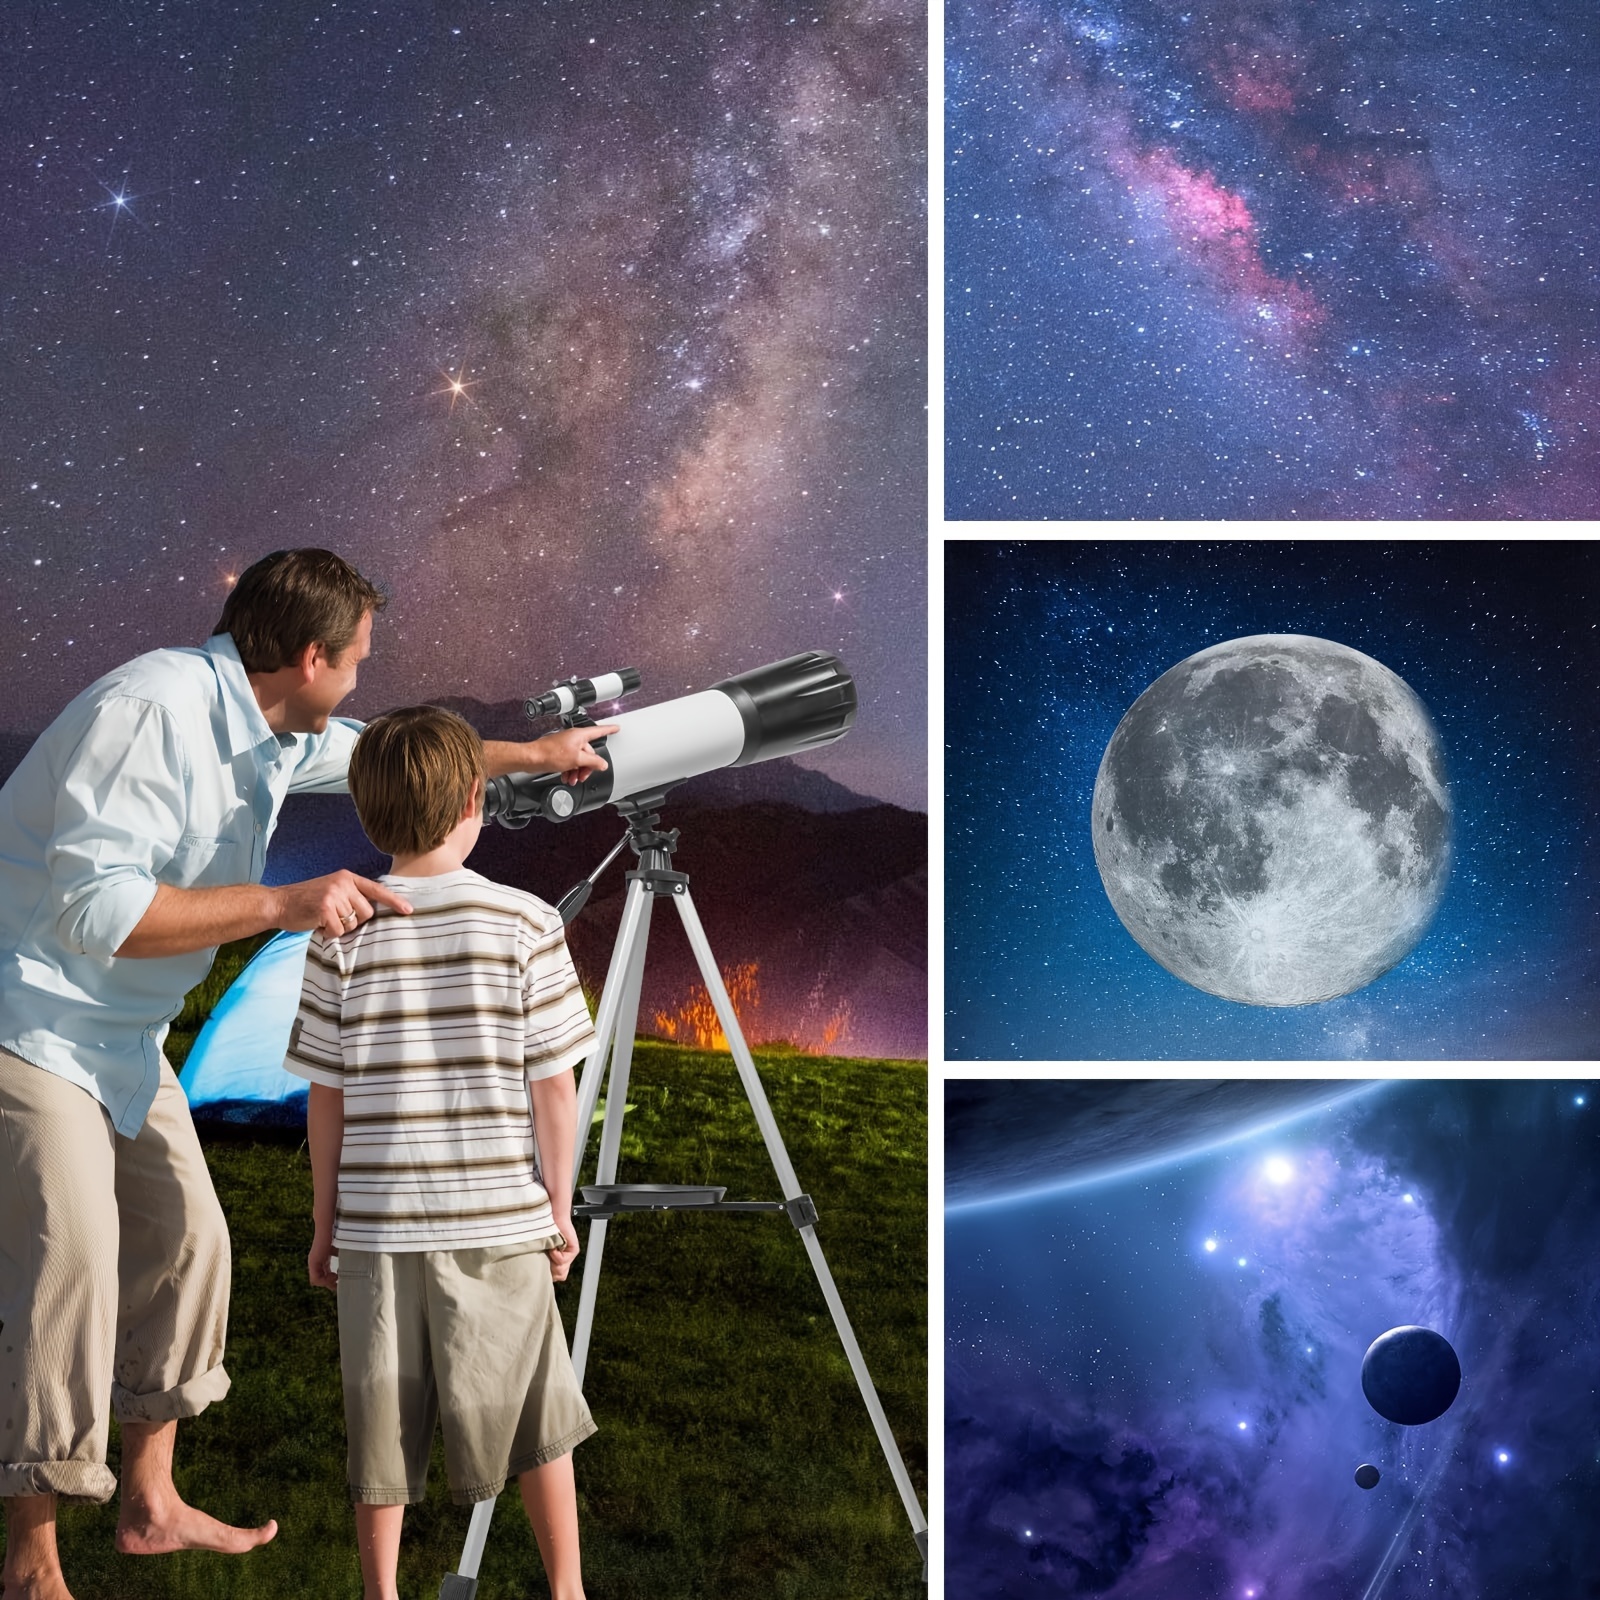 

Telescope 80mm Aperture 600mm - Astronomical Portable Refracting Telescope Fully Multi-coated High Transmission Coatings Az Mount With Tripod, Phone Adapter & Carrying Bag